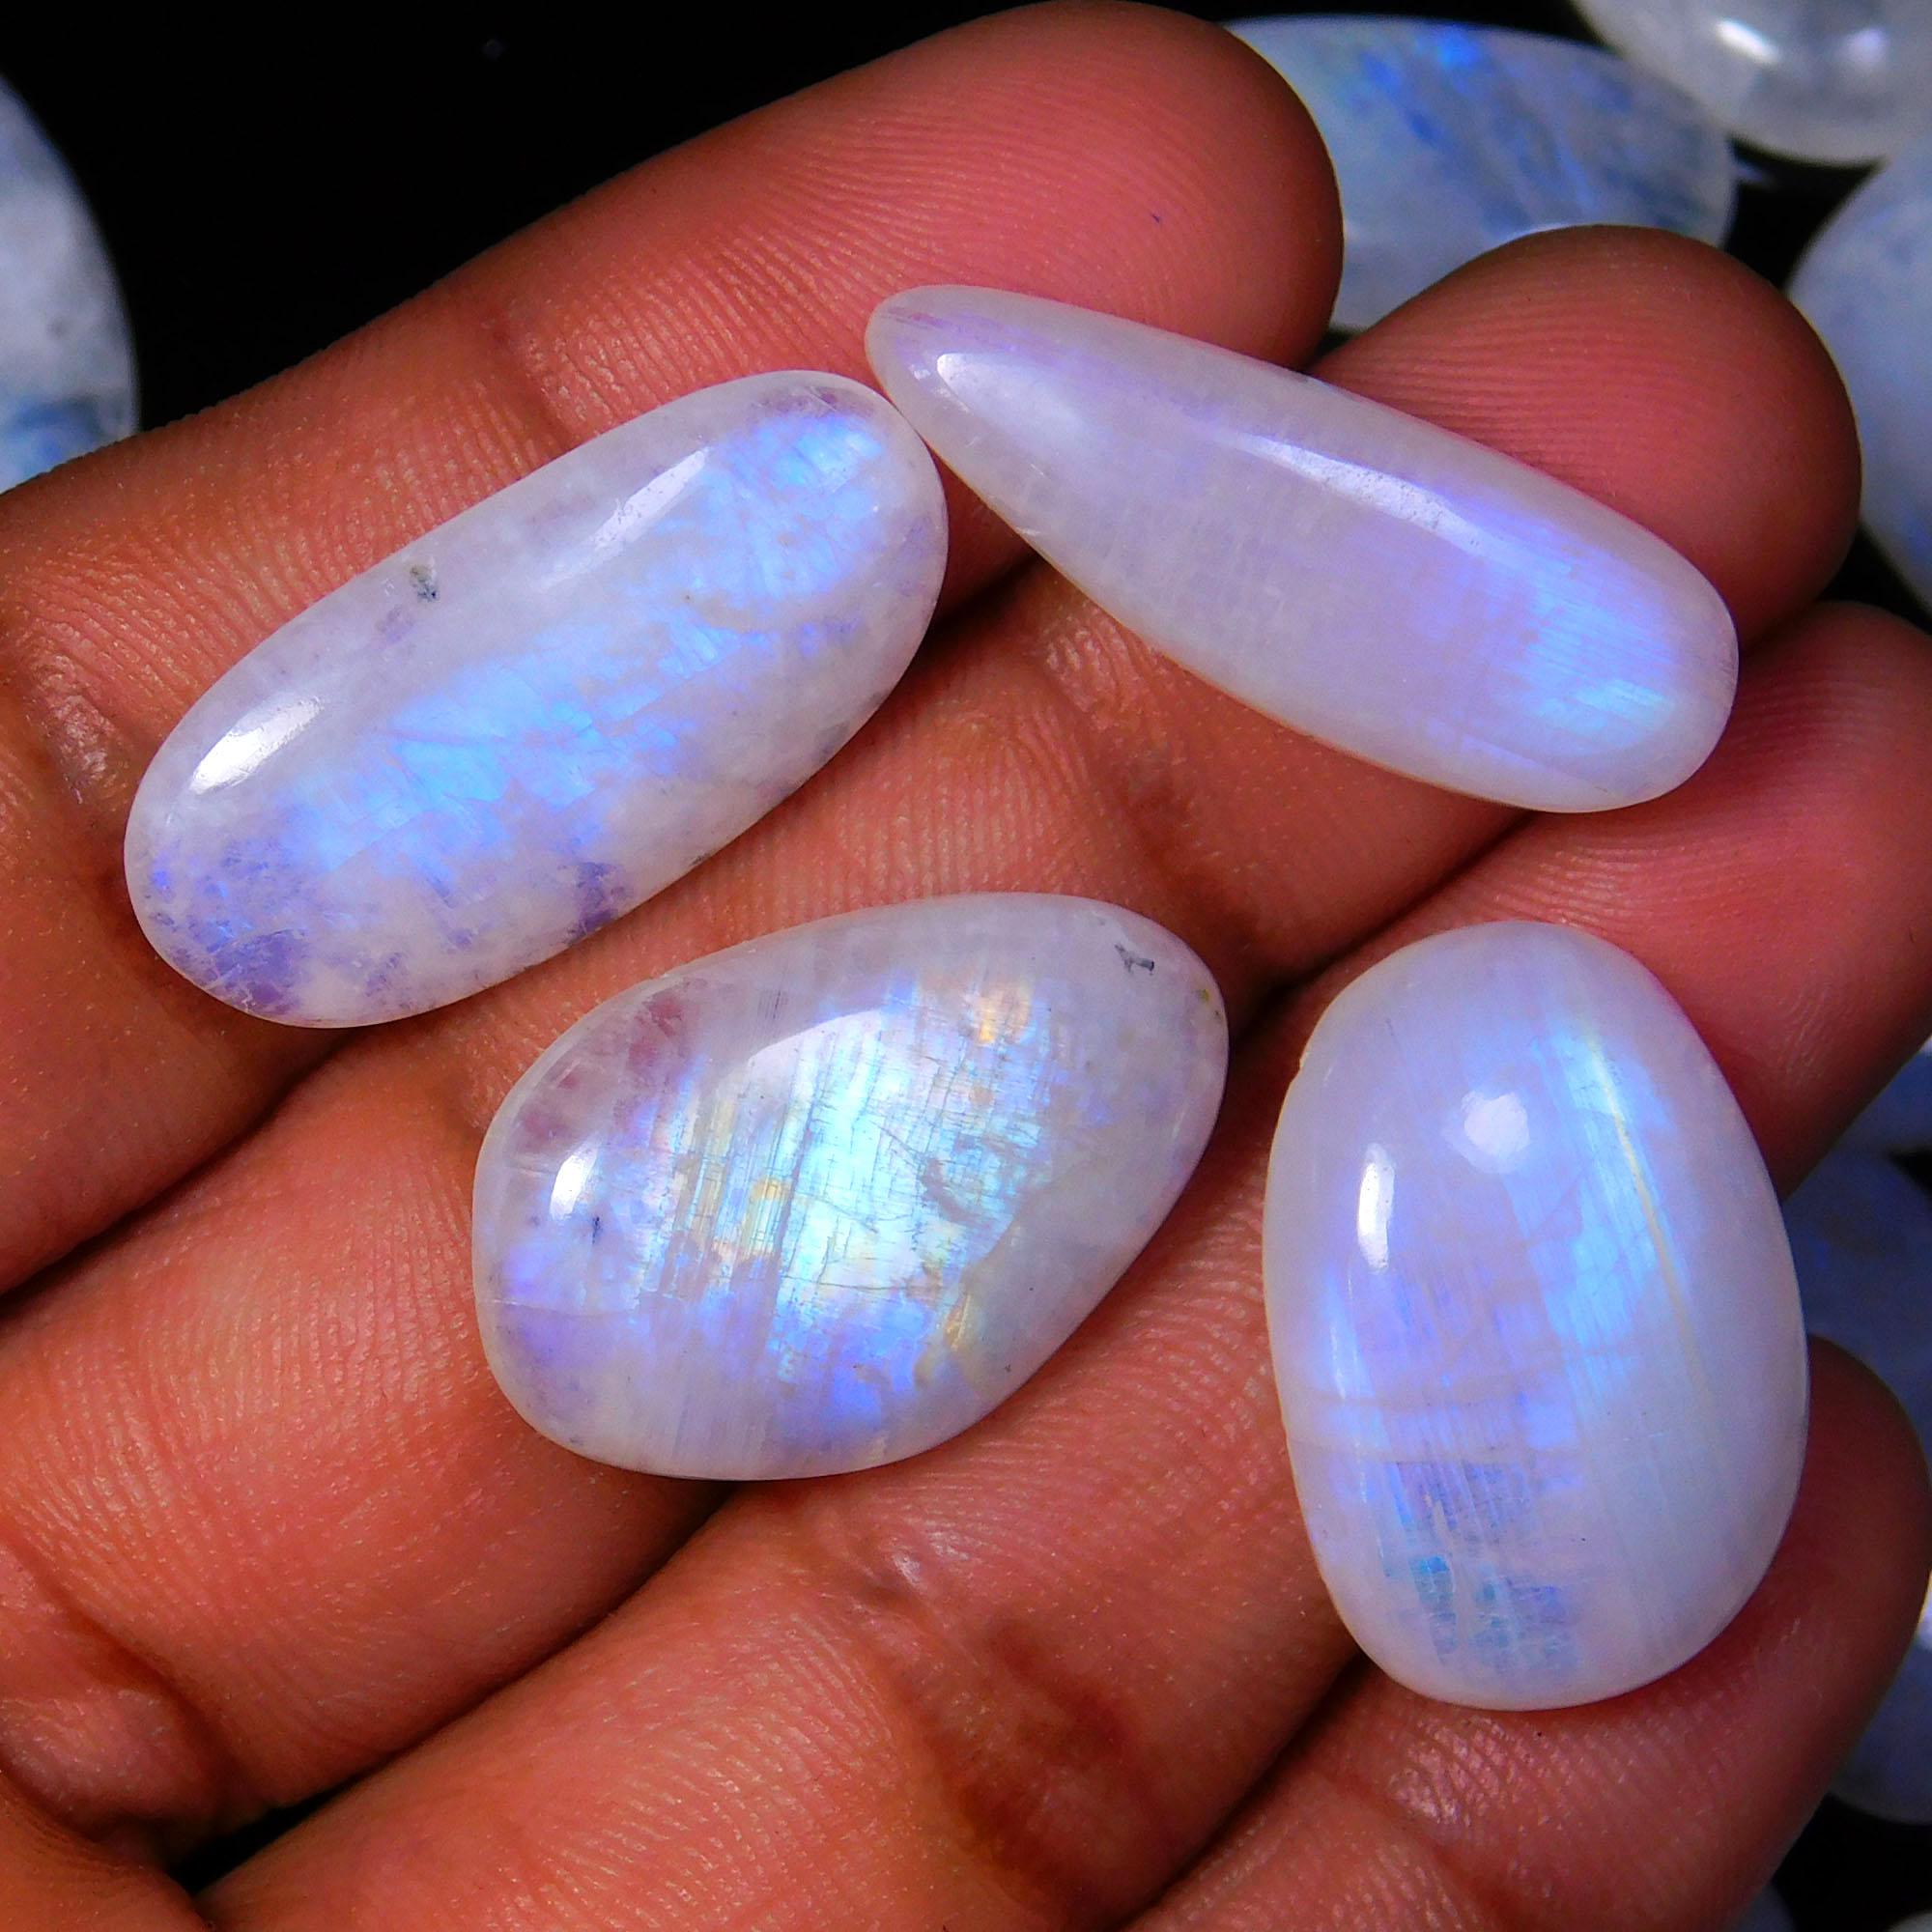 33 Pcs. 452Cts. Natural Blue Fire Rainbow Moonstone polished Mix Cabochon Wholesale Loose Gemstone Lot  Size 27x18 18x12mm for jewelry